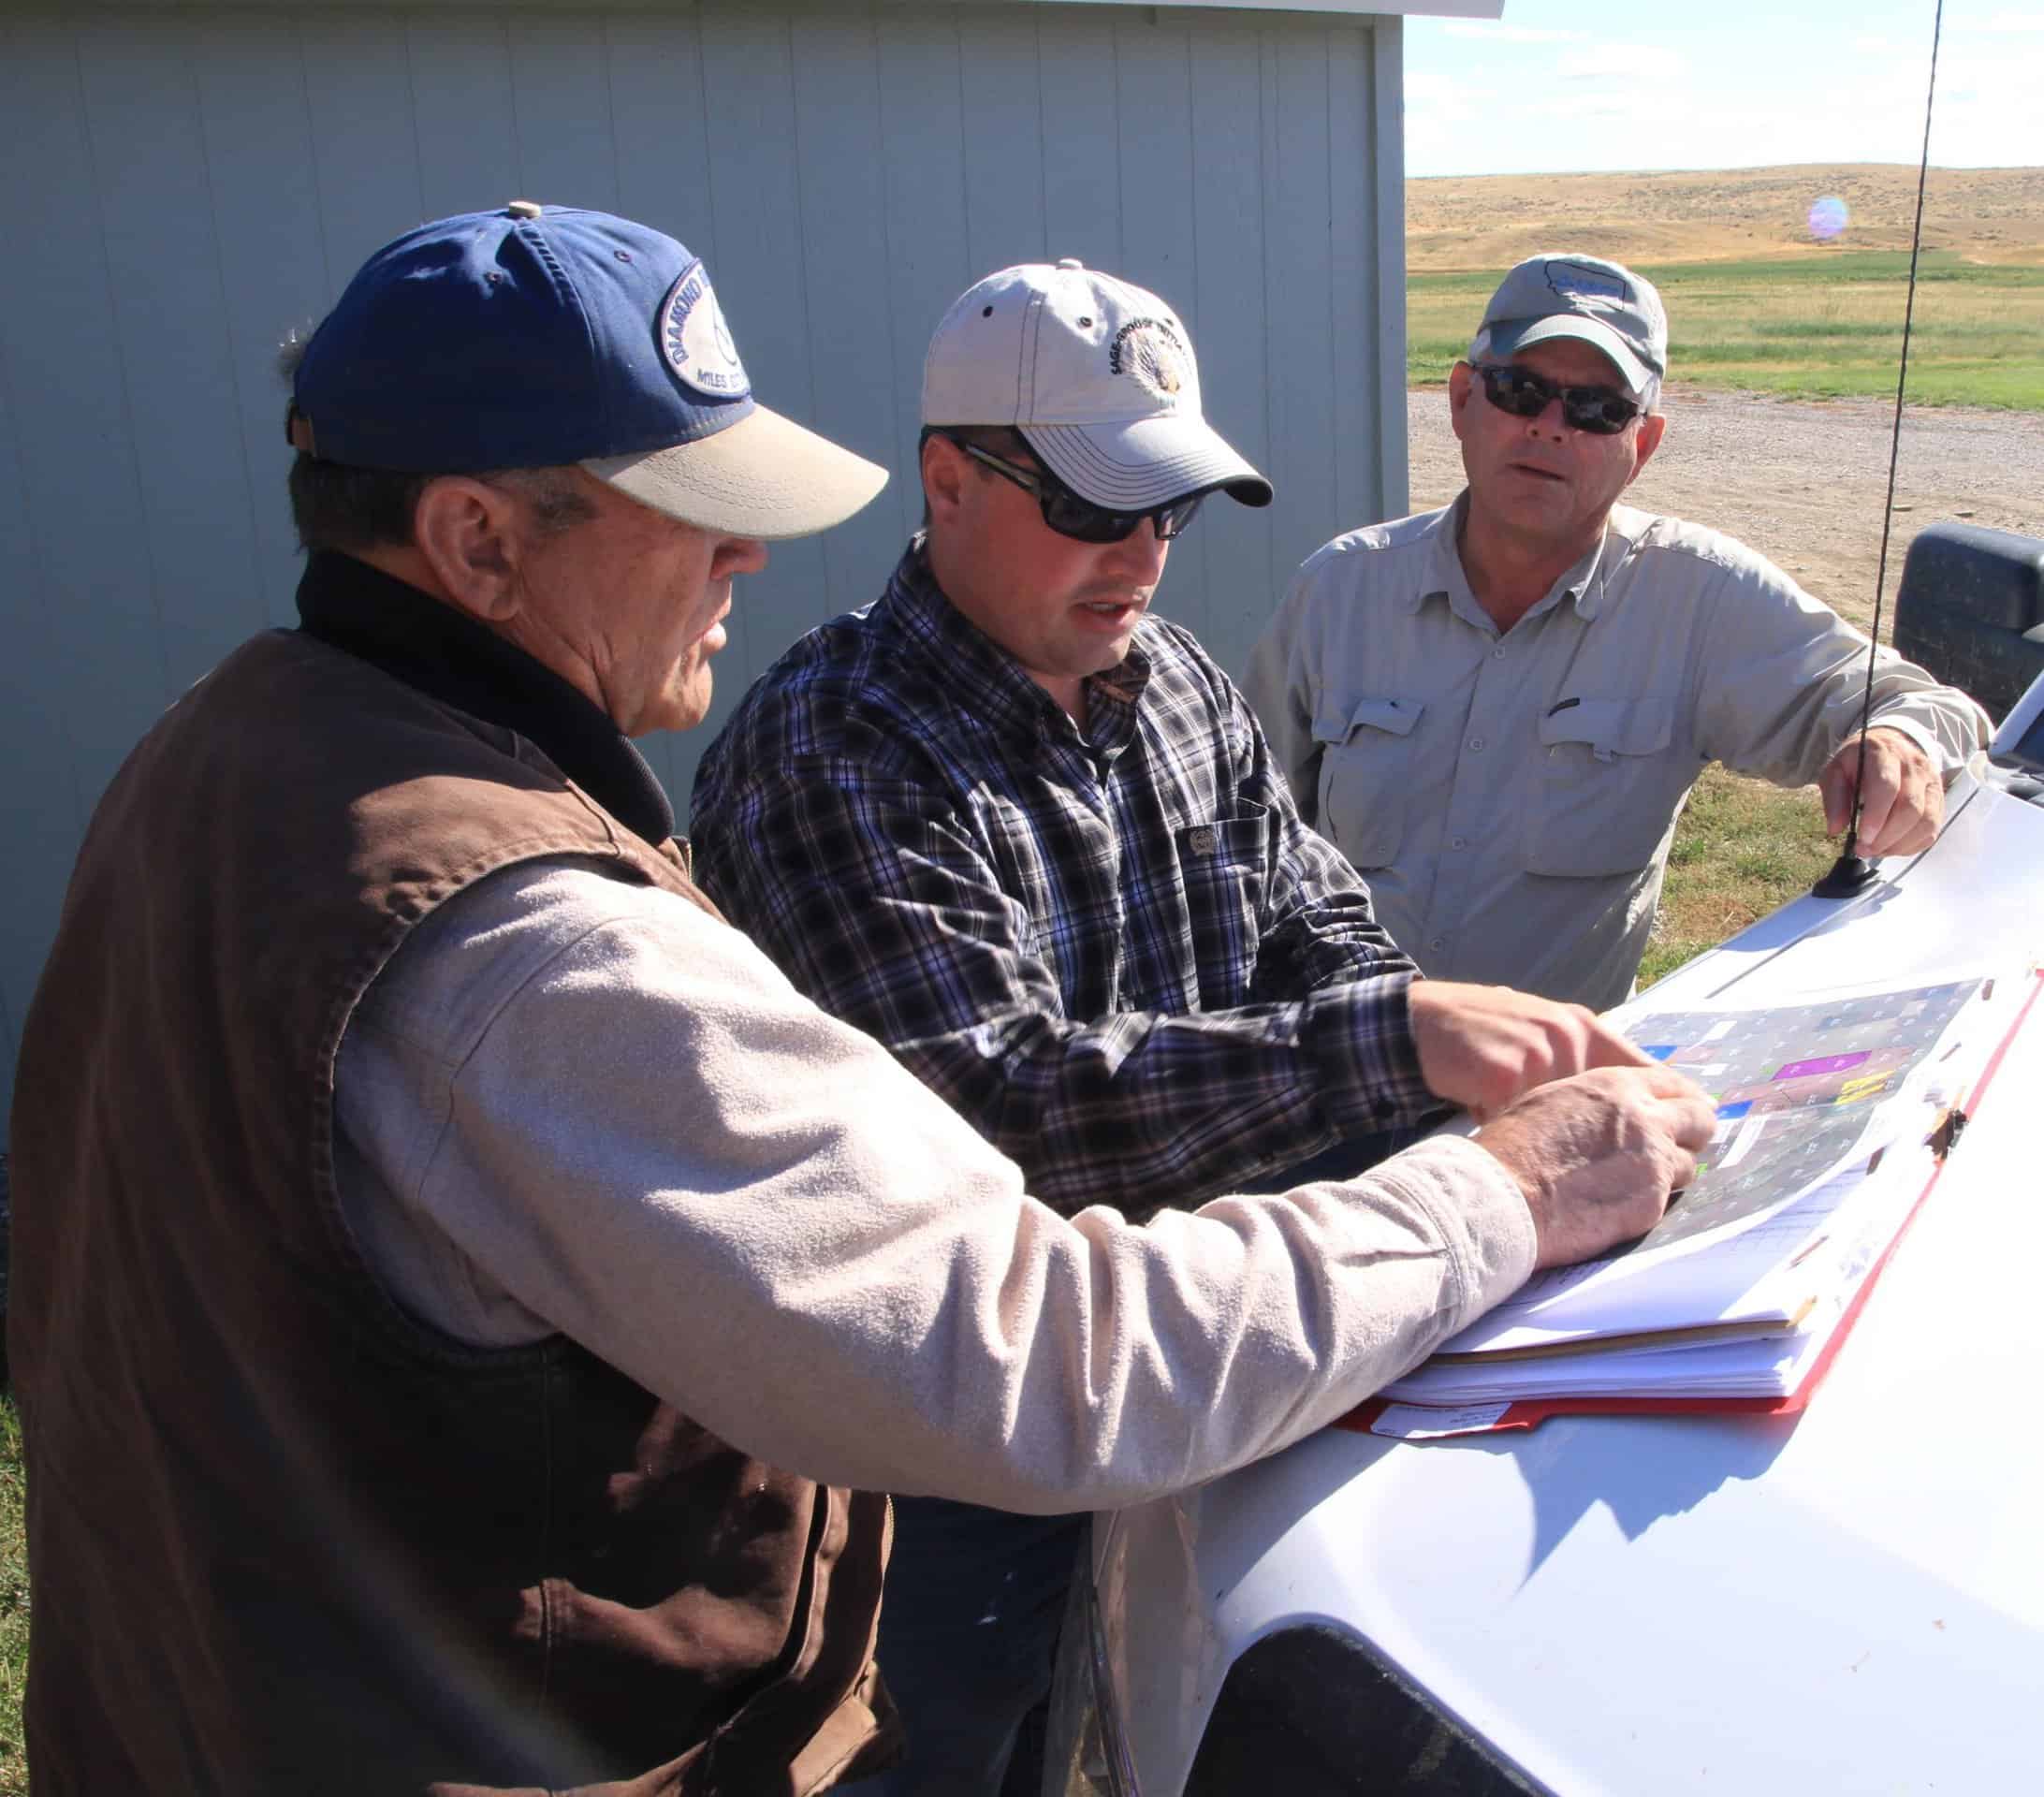 NRCS helps with conservation planning and technical assistance